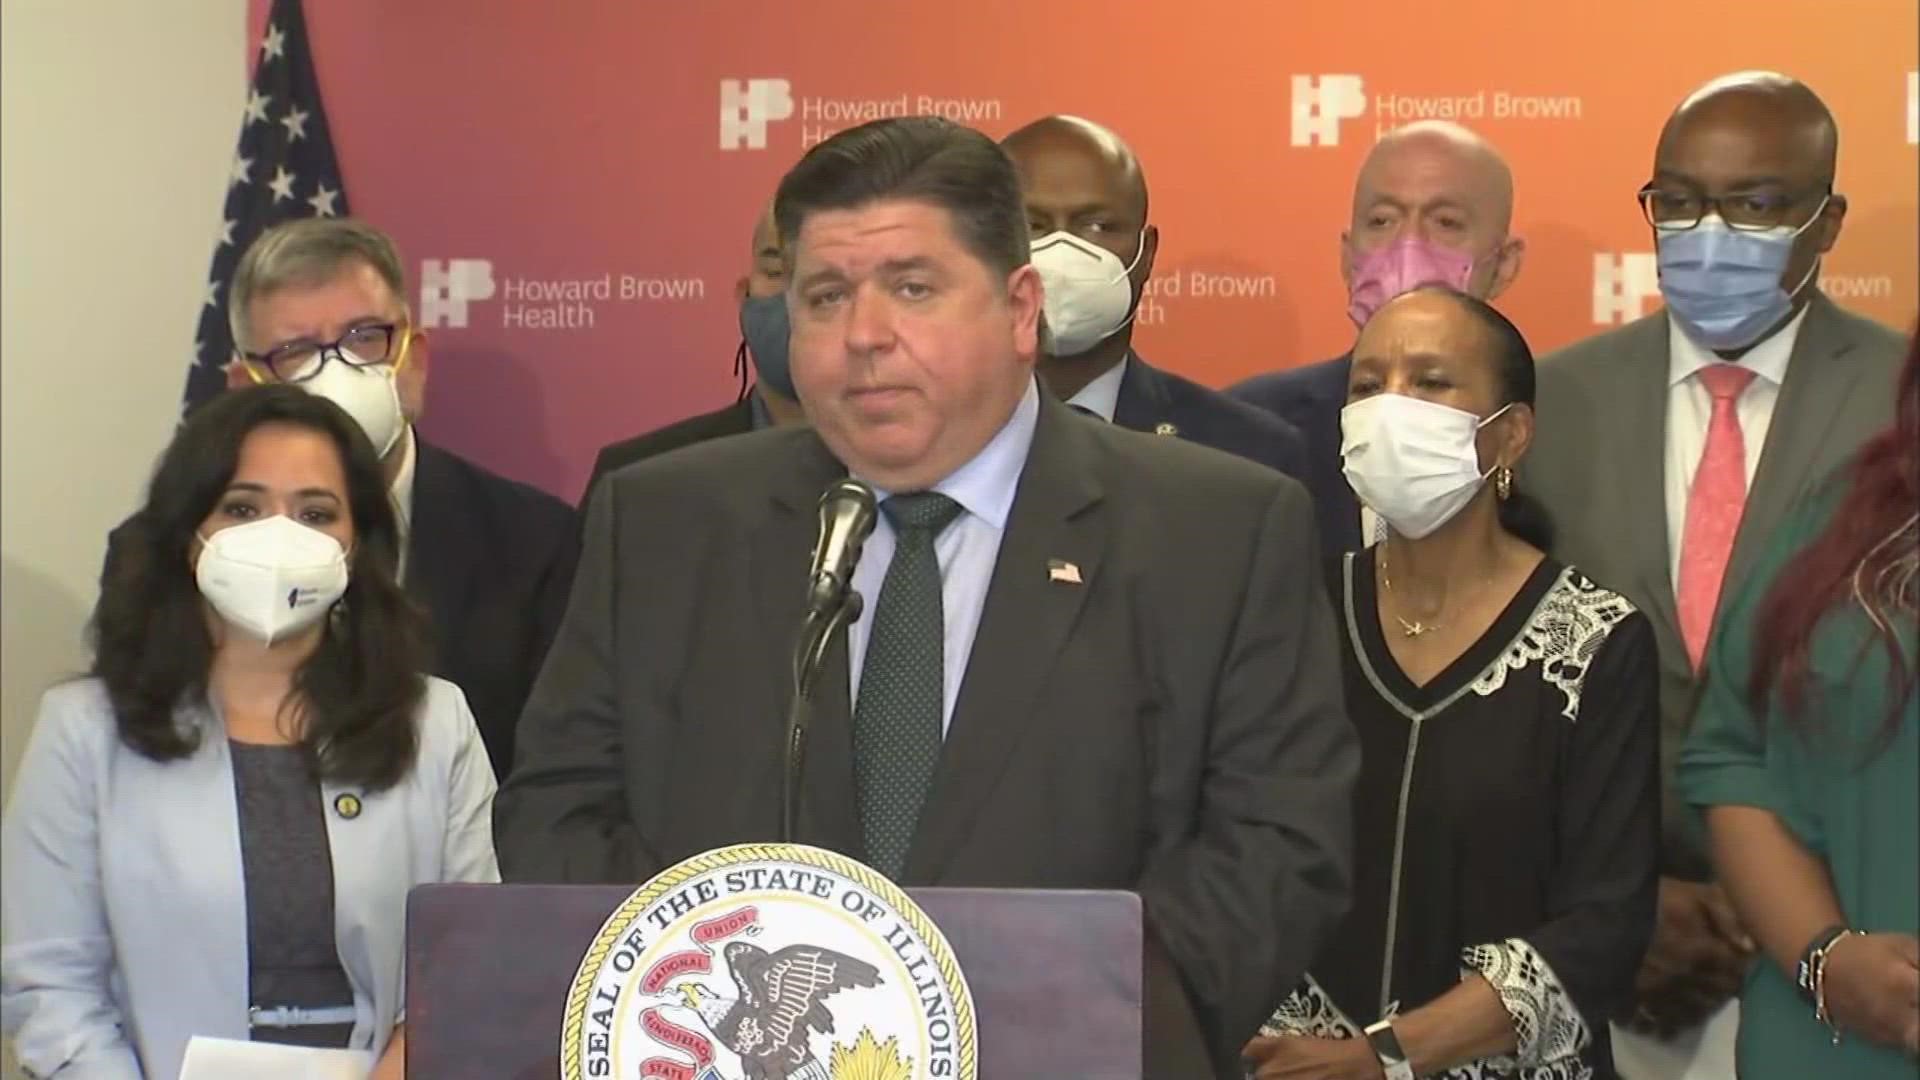 The Supreme Court has ended constitutional protections for abortion that had been in place nearly 50 years. Pritzker shares his reaction to the ruling.